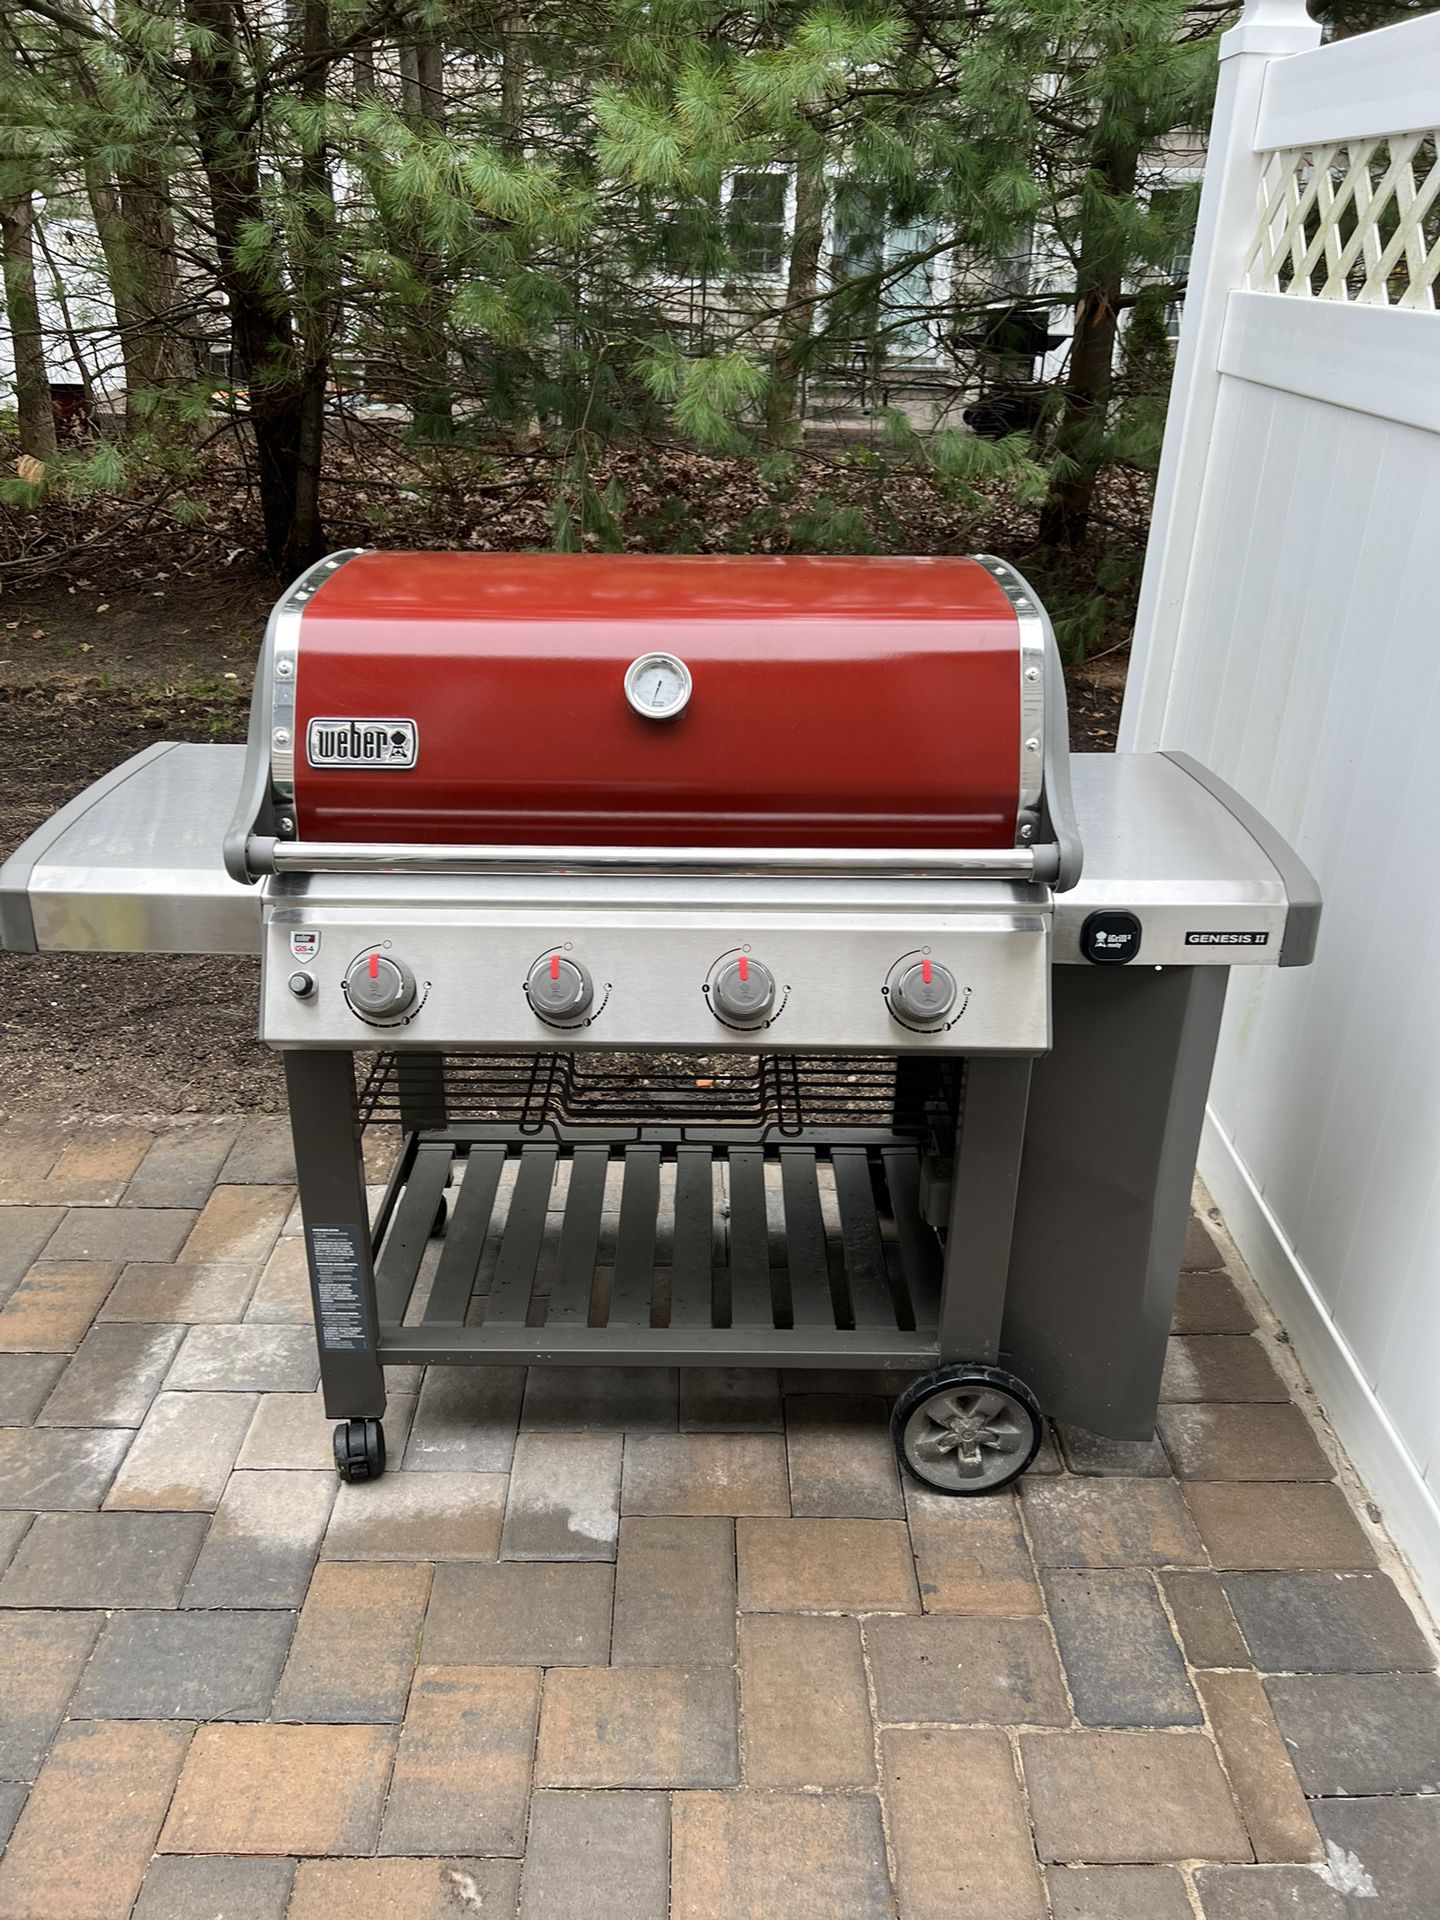 Phobia løfte op halvt weber genesis II E-410 4 burner crimson grill with cover and tank for Sale  in Bohemia, NY - OfferUp